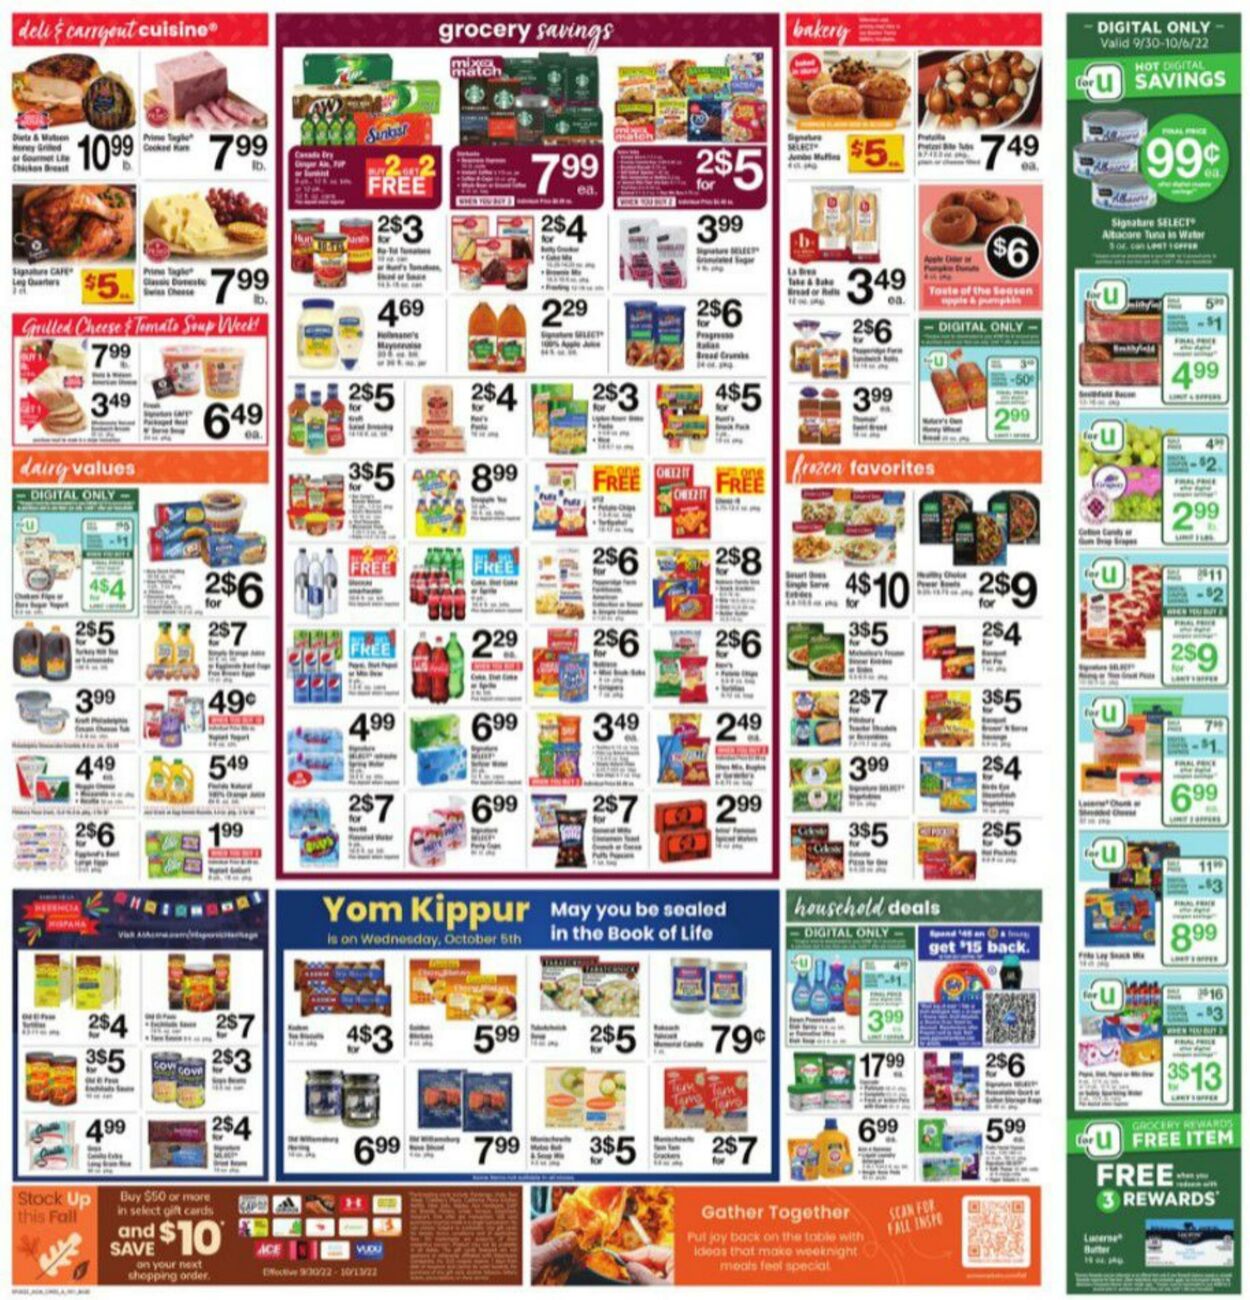 Weekly ad Acme 09/30/2022 - 10/06/2022